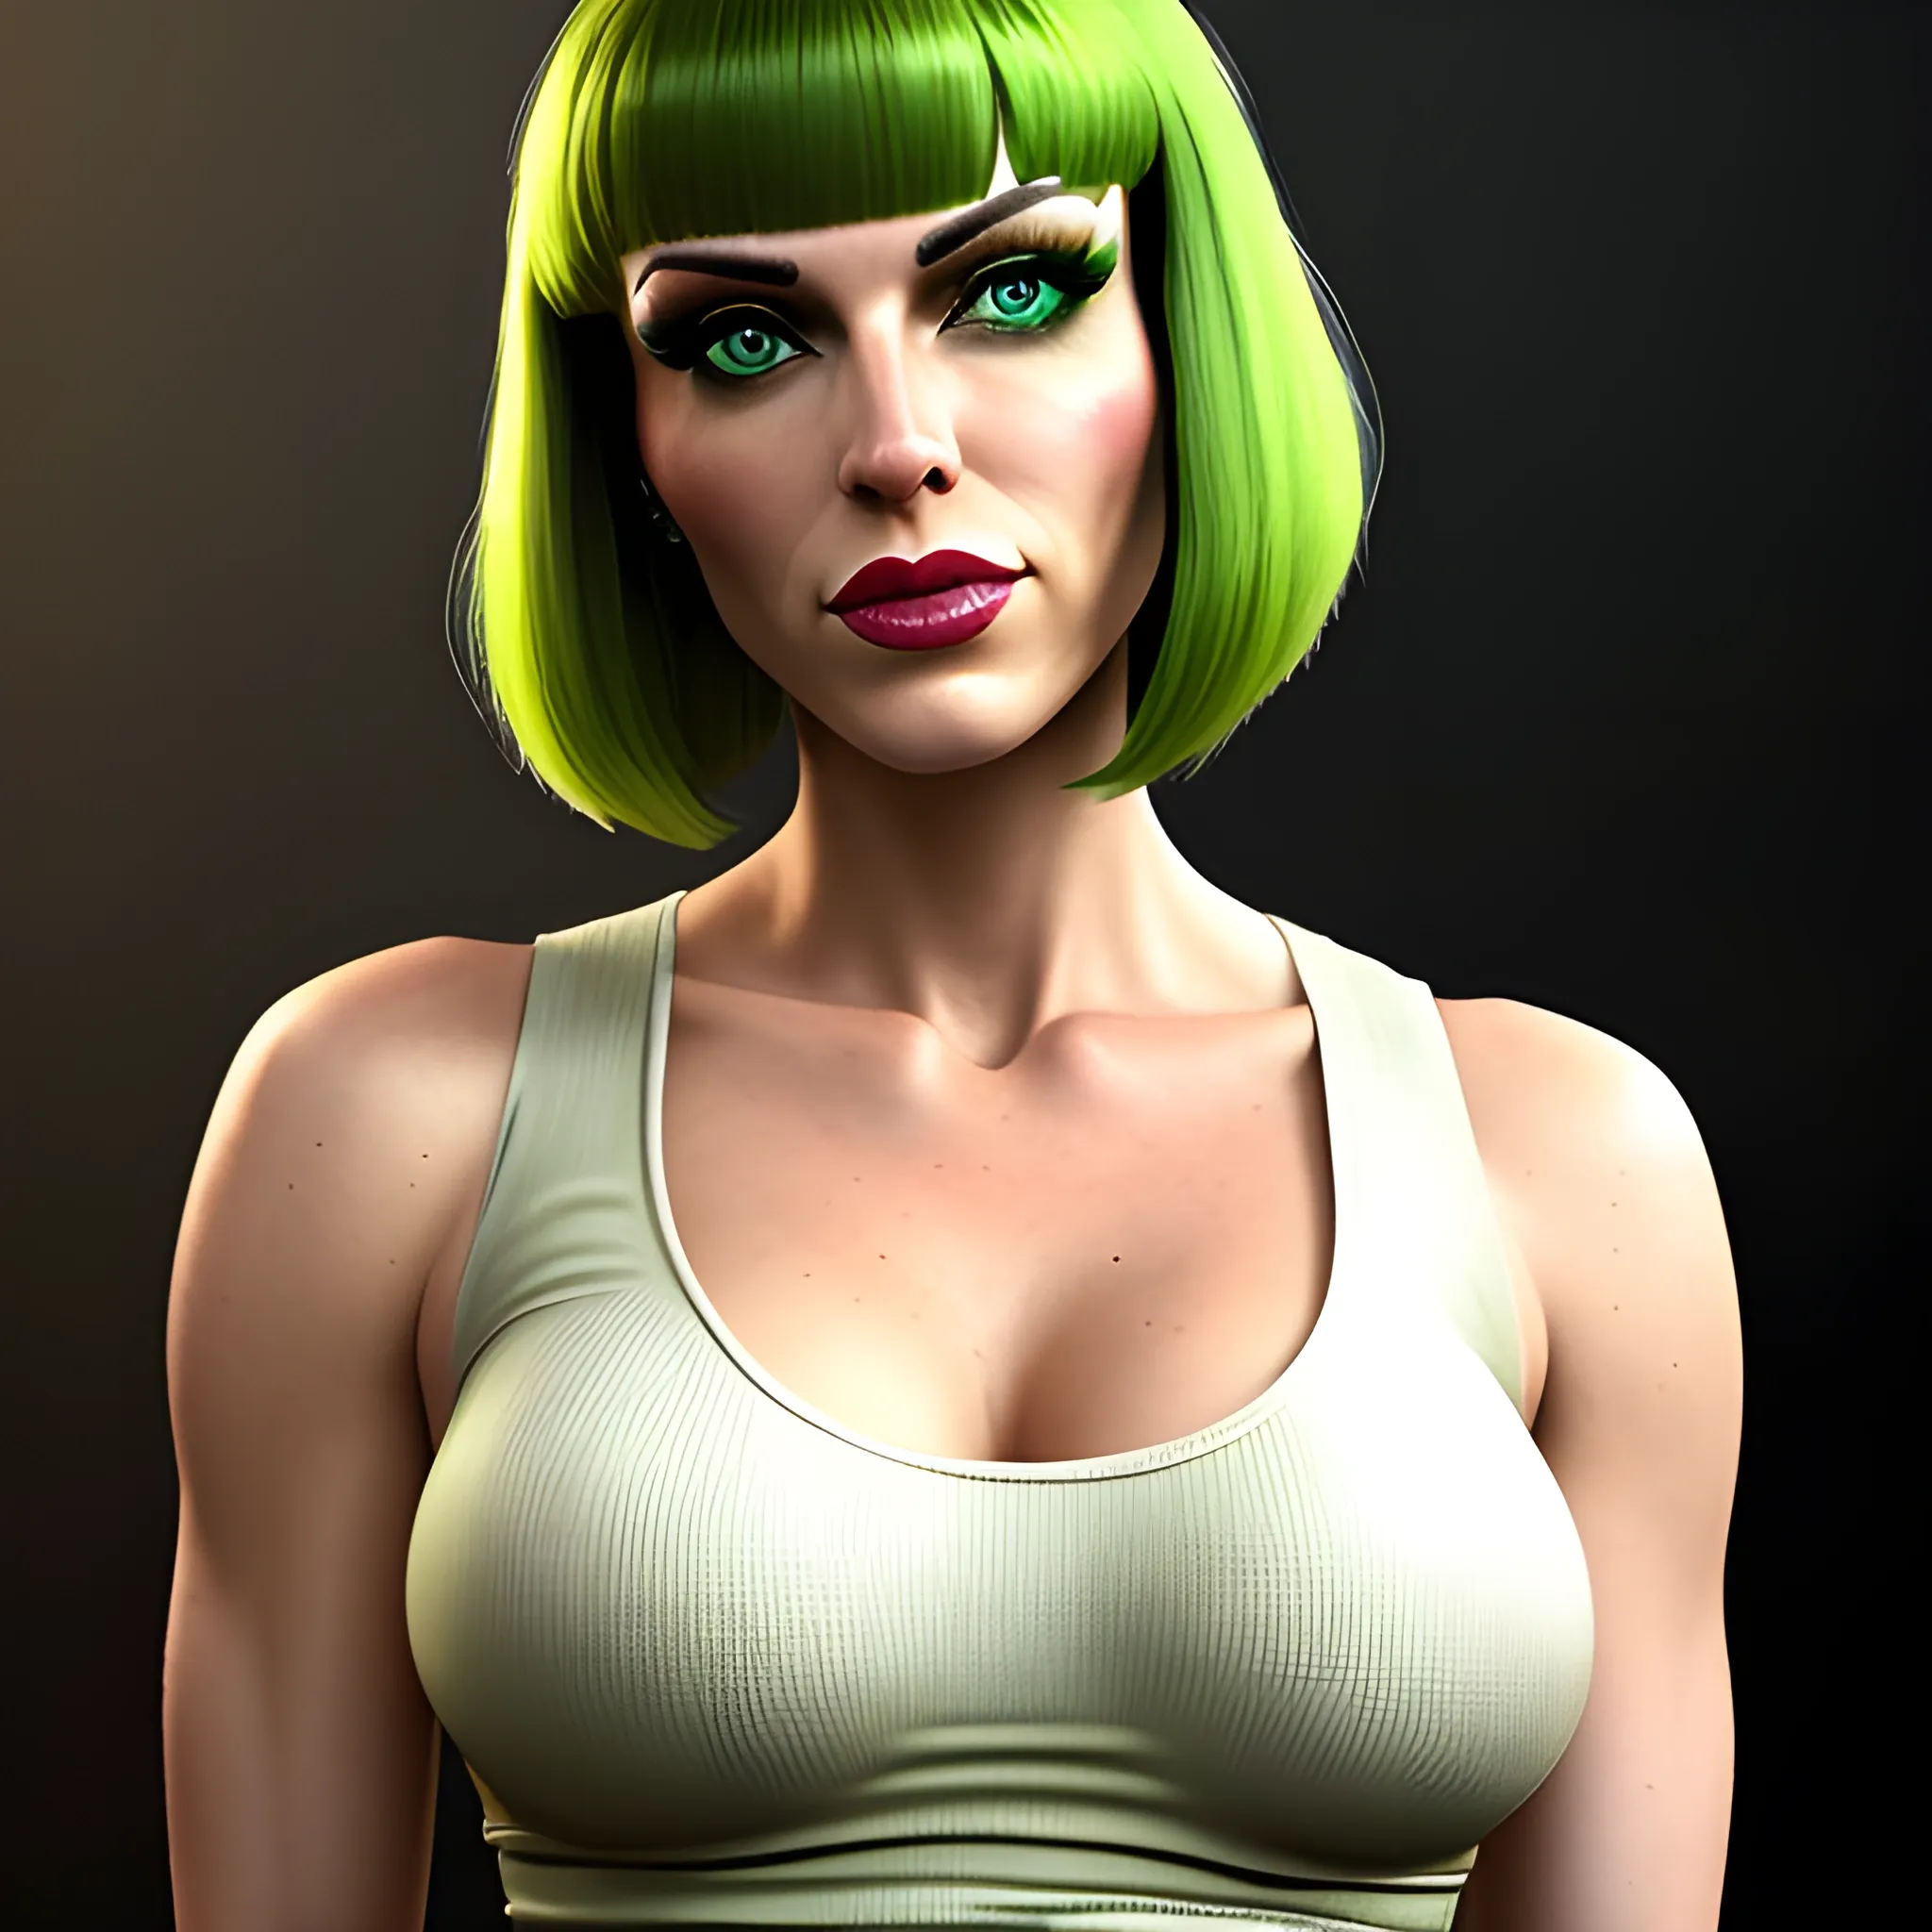 In the style of Fallout 1, (masterpiece), (portrait photography), (portrait of an adult Caucasian female), Leeloo from the 5th Element, choppy bob hairstyle, bob hairstyle, green eyes, white tanktop, small bust